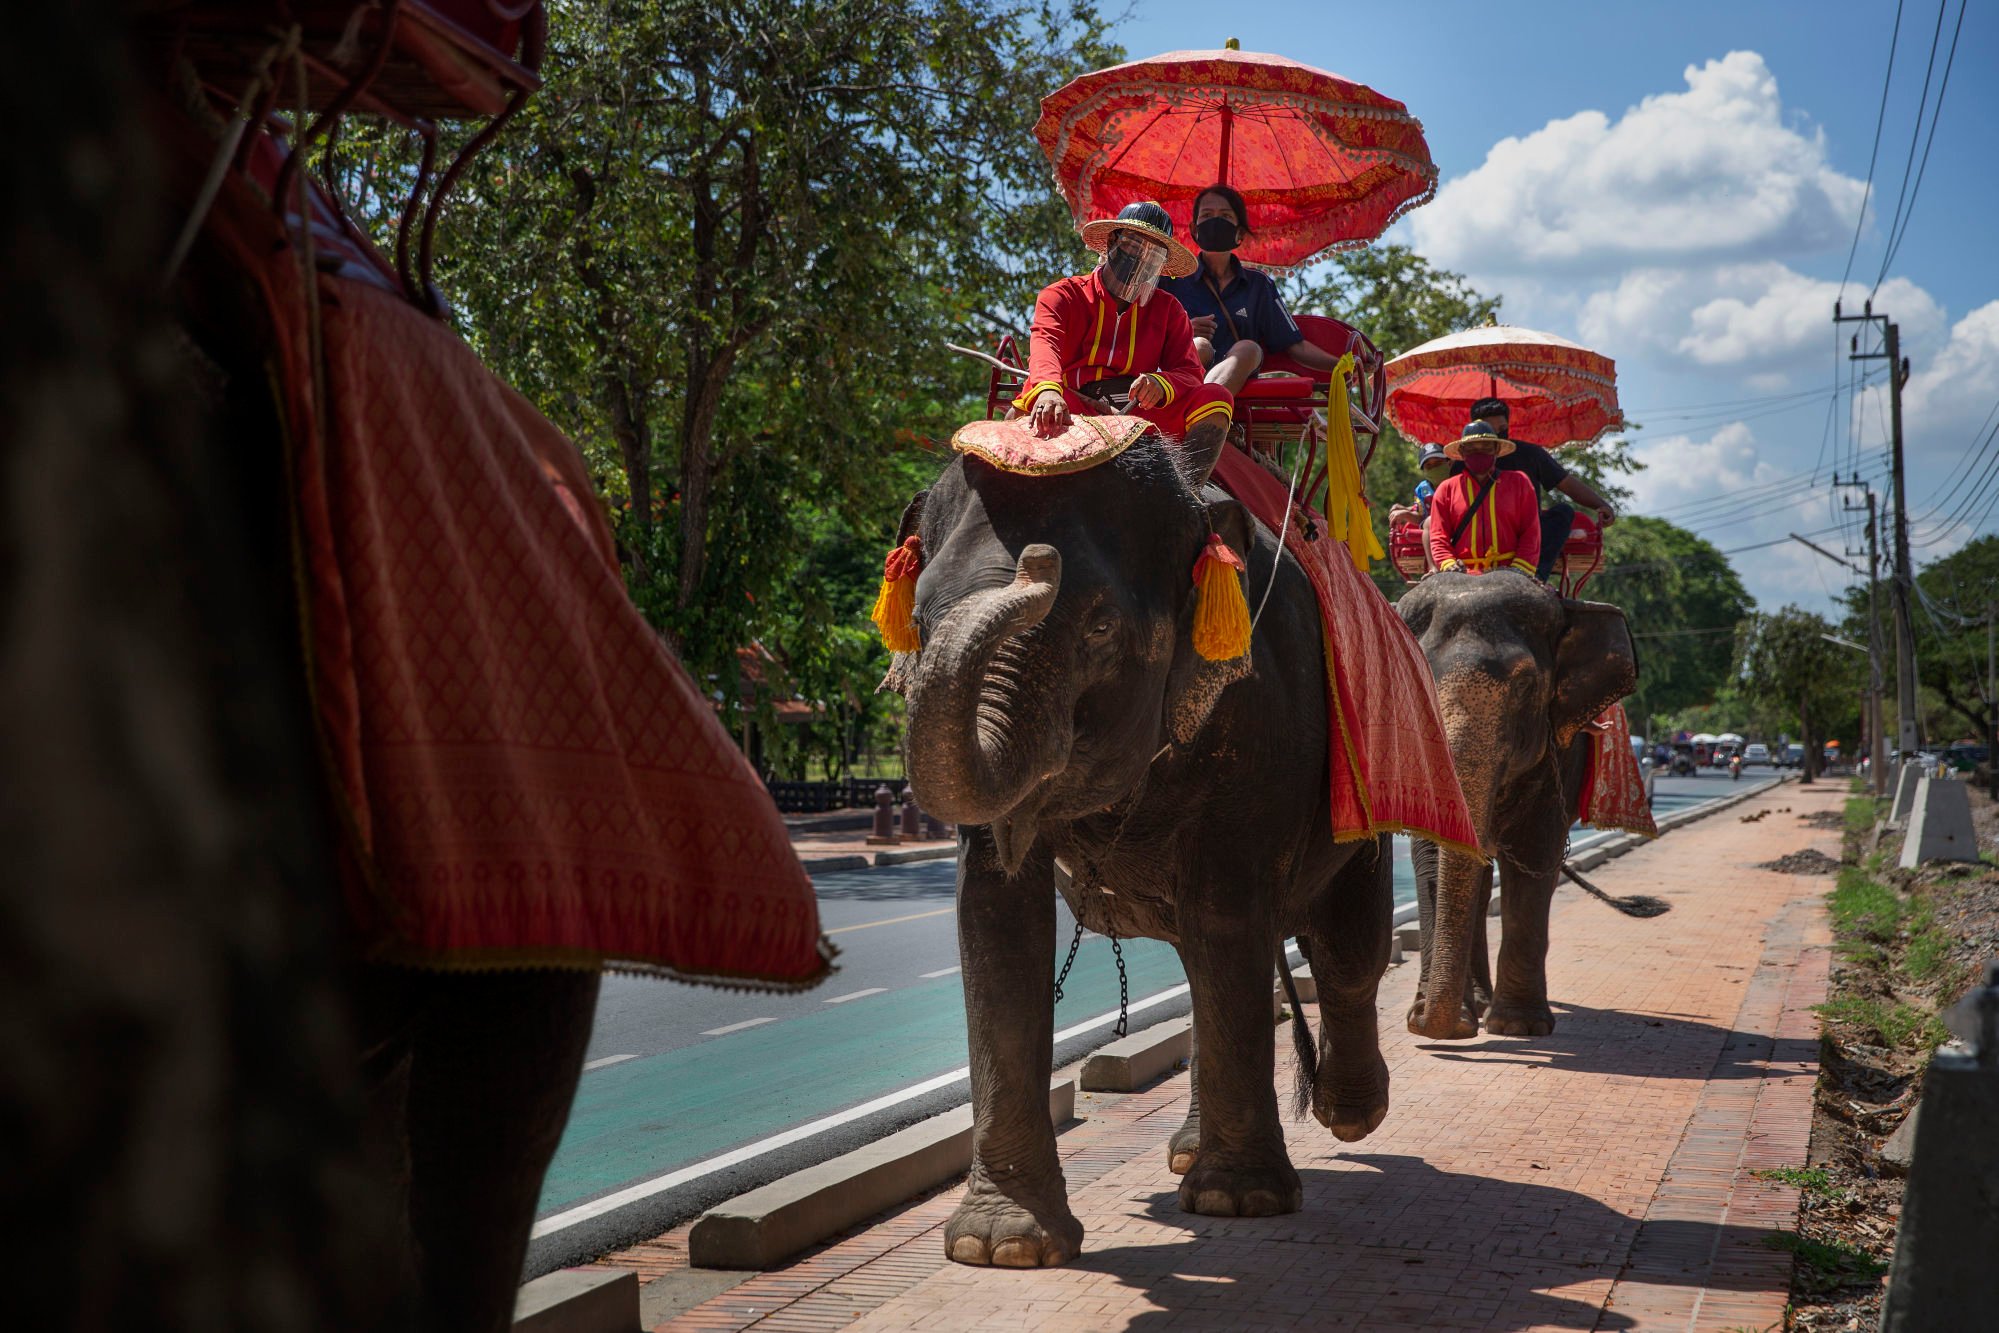 Tourists ride elephants at the Ayutthaya Elephant Palace and Royal Kraal in Thailand. Photo: Getty Images